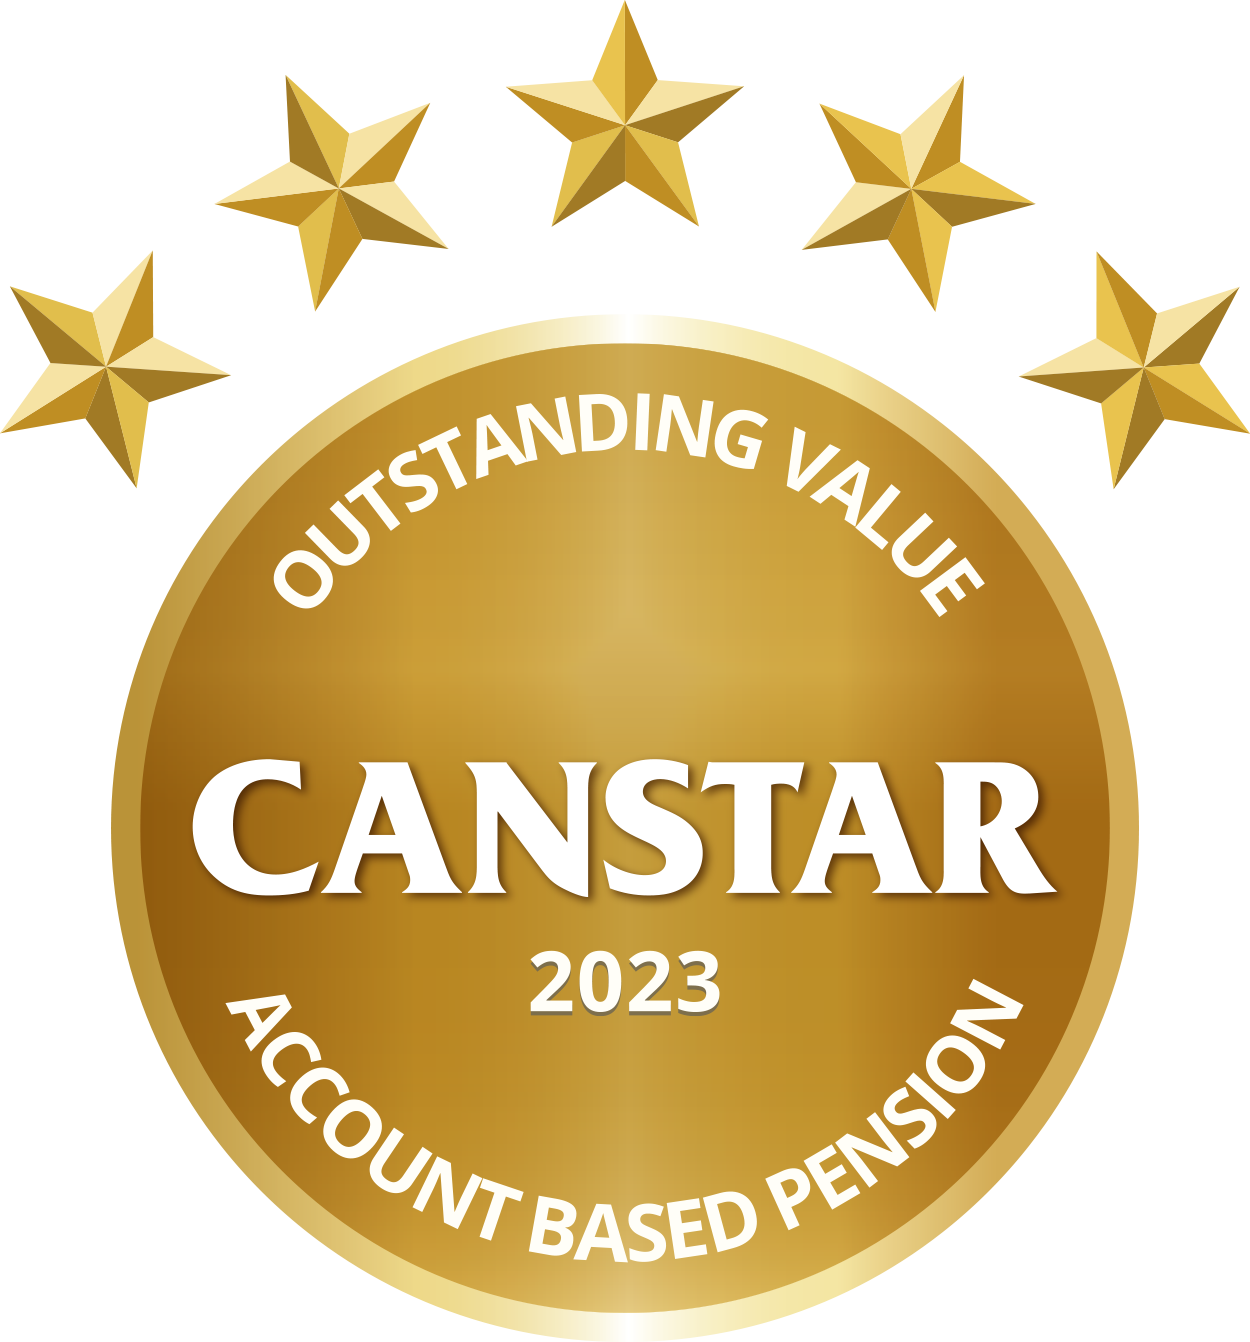 Canstar Outstanding Value Pension 2023